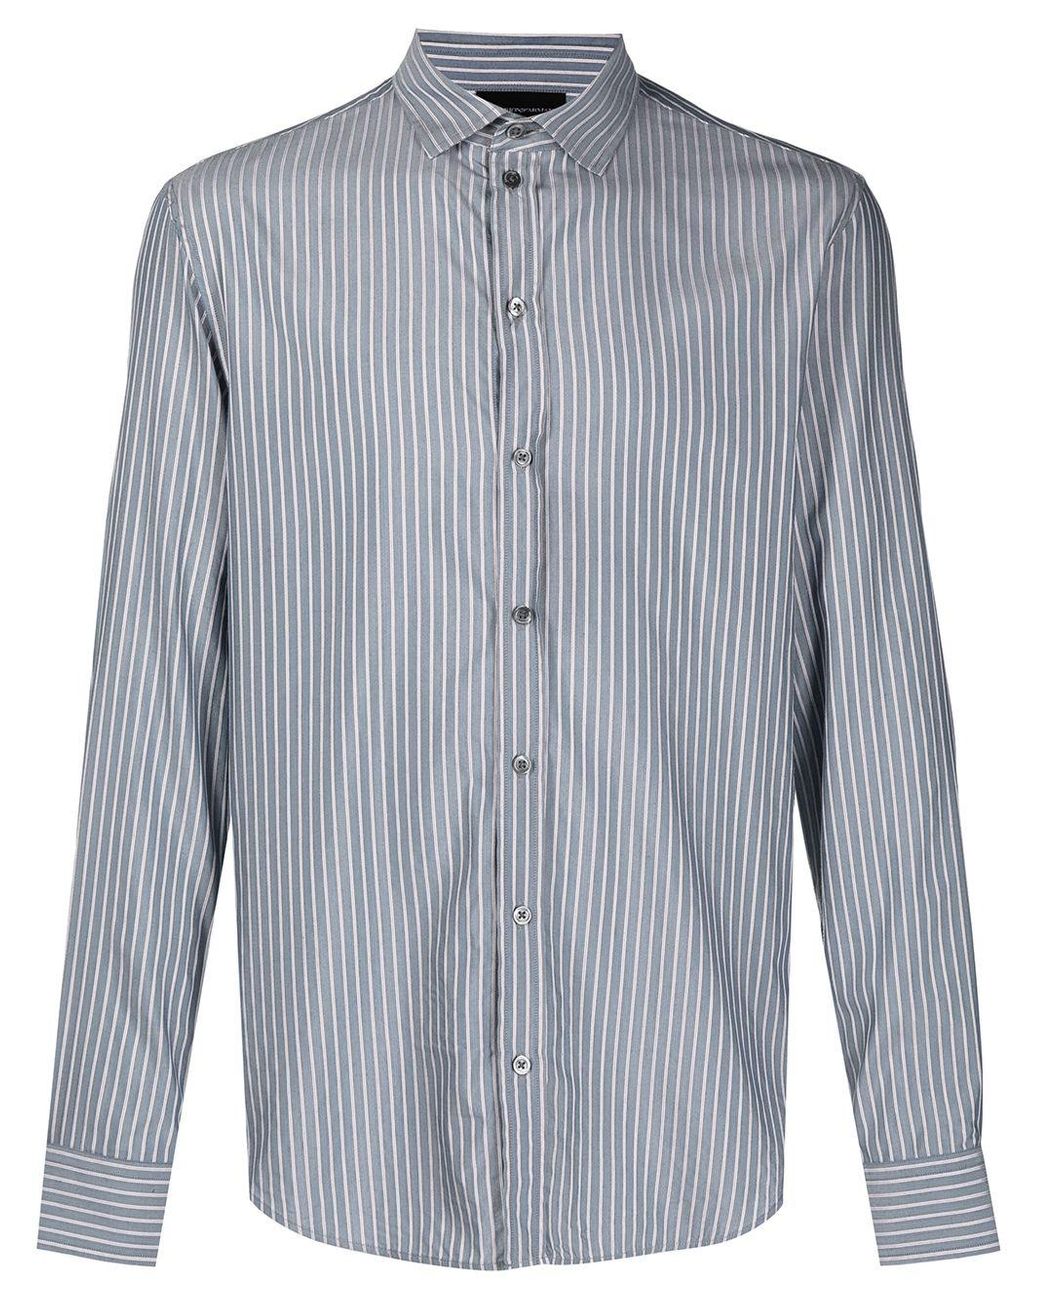 Emporio Armani Striped Button-up Shirt in Grey (Blue) for Men - Save 1% ...